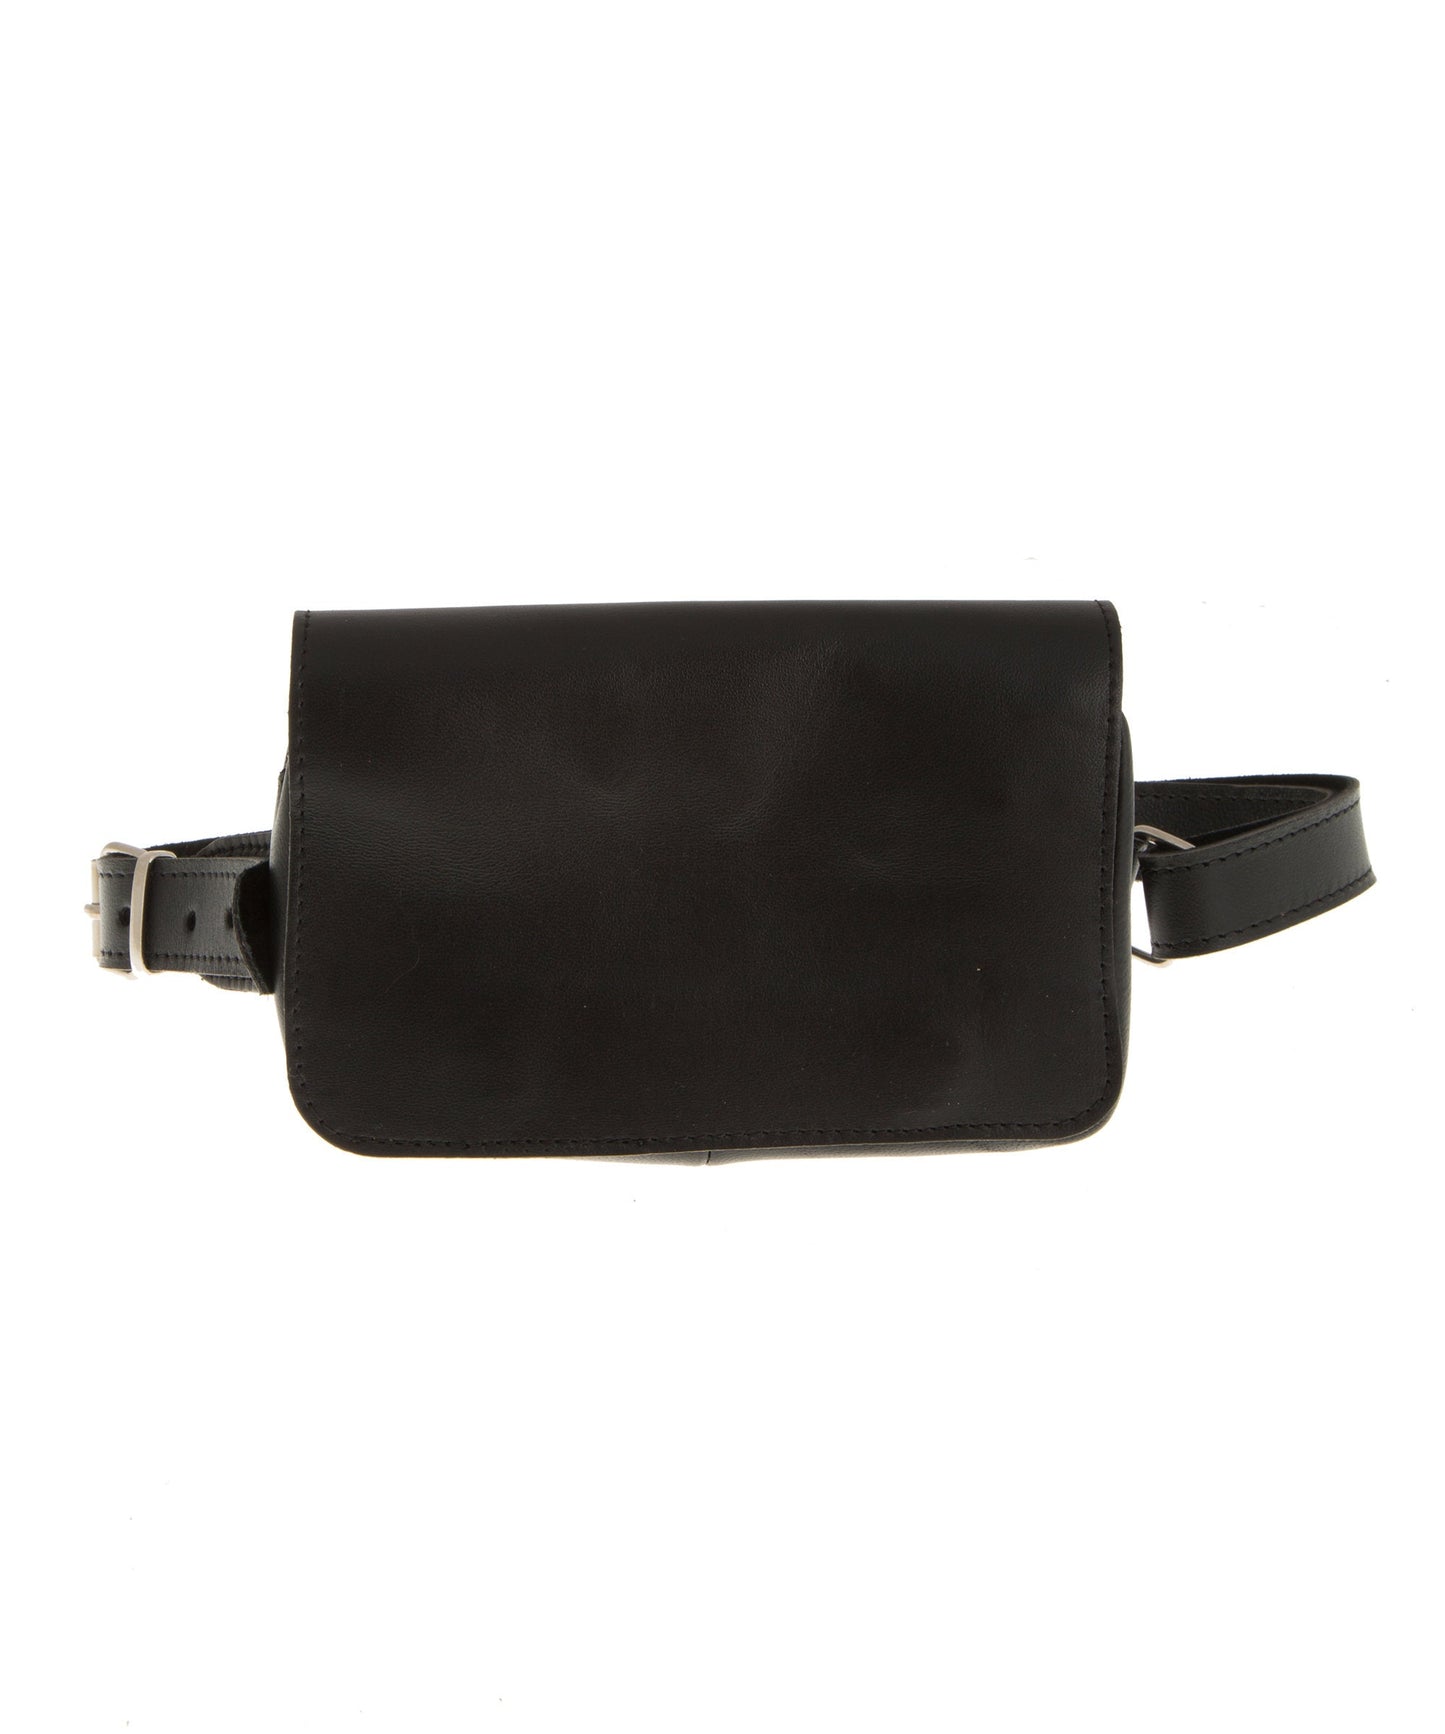 Soft leather minimalist fanny pack for women, Unique Leather belt bag, Zippered leather bum bag